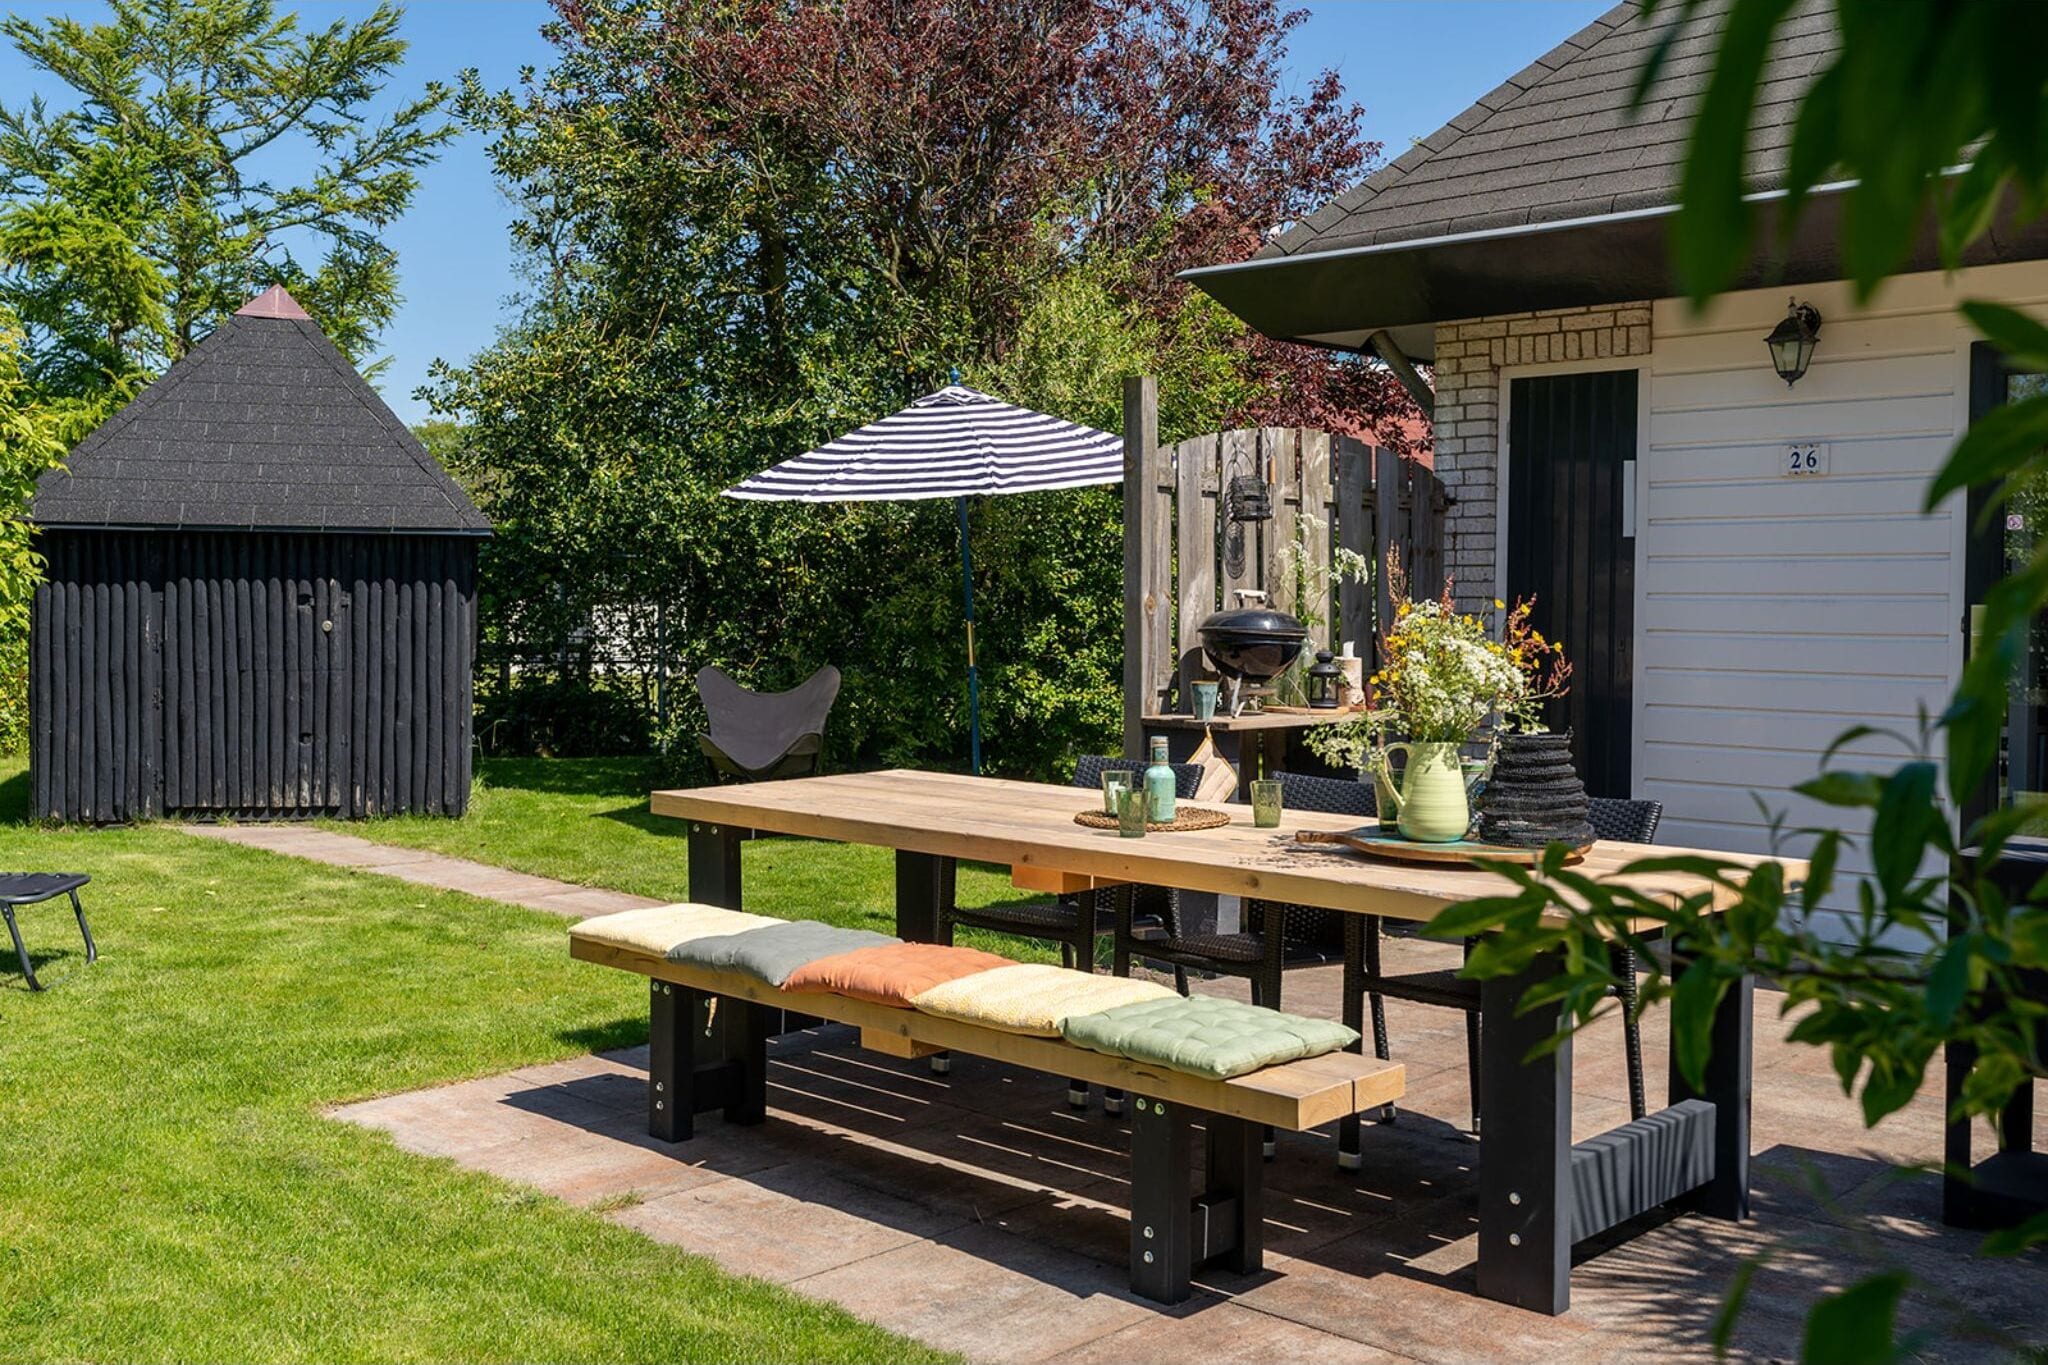 Idyllic holiday home with fenced garden